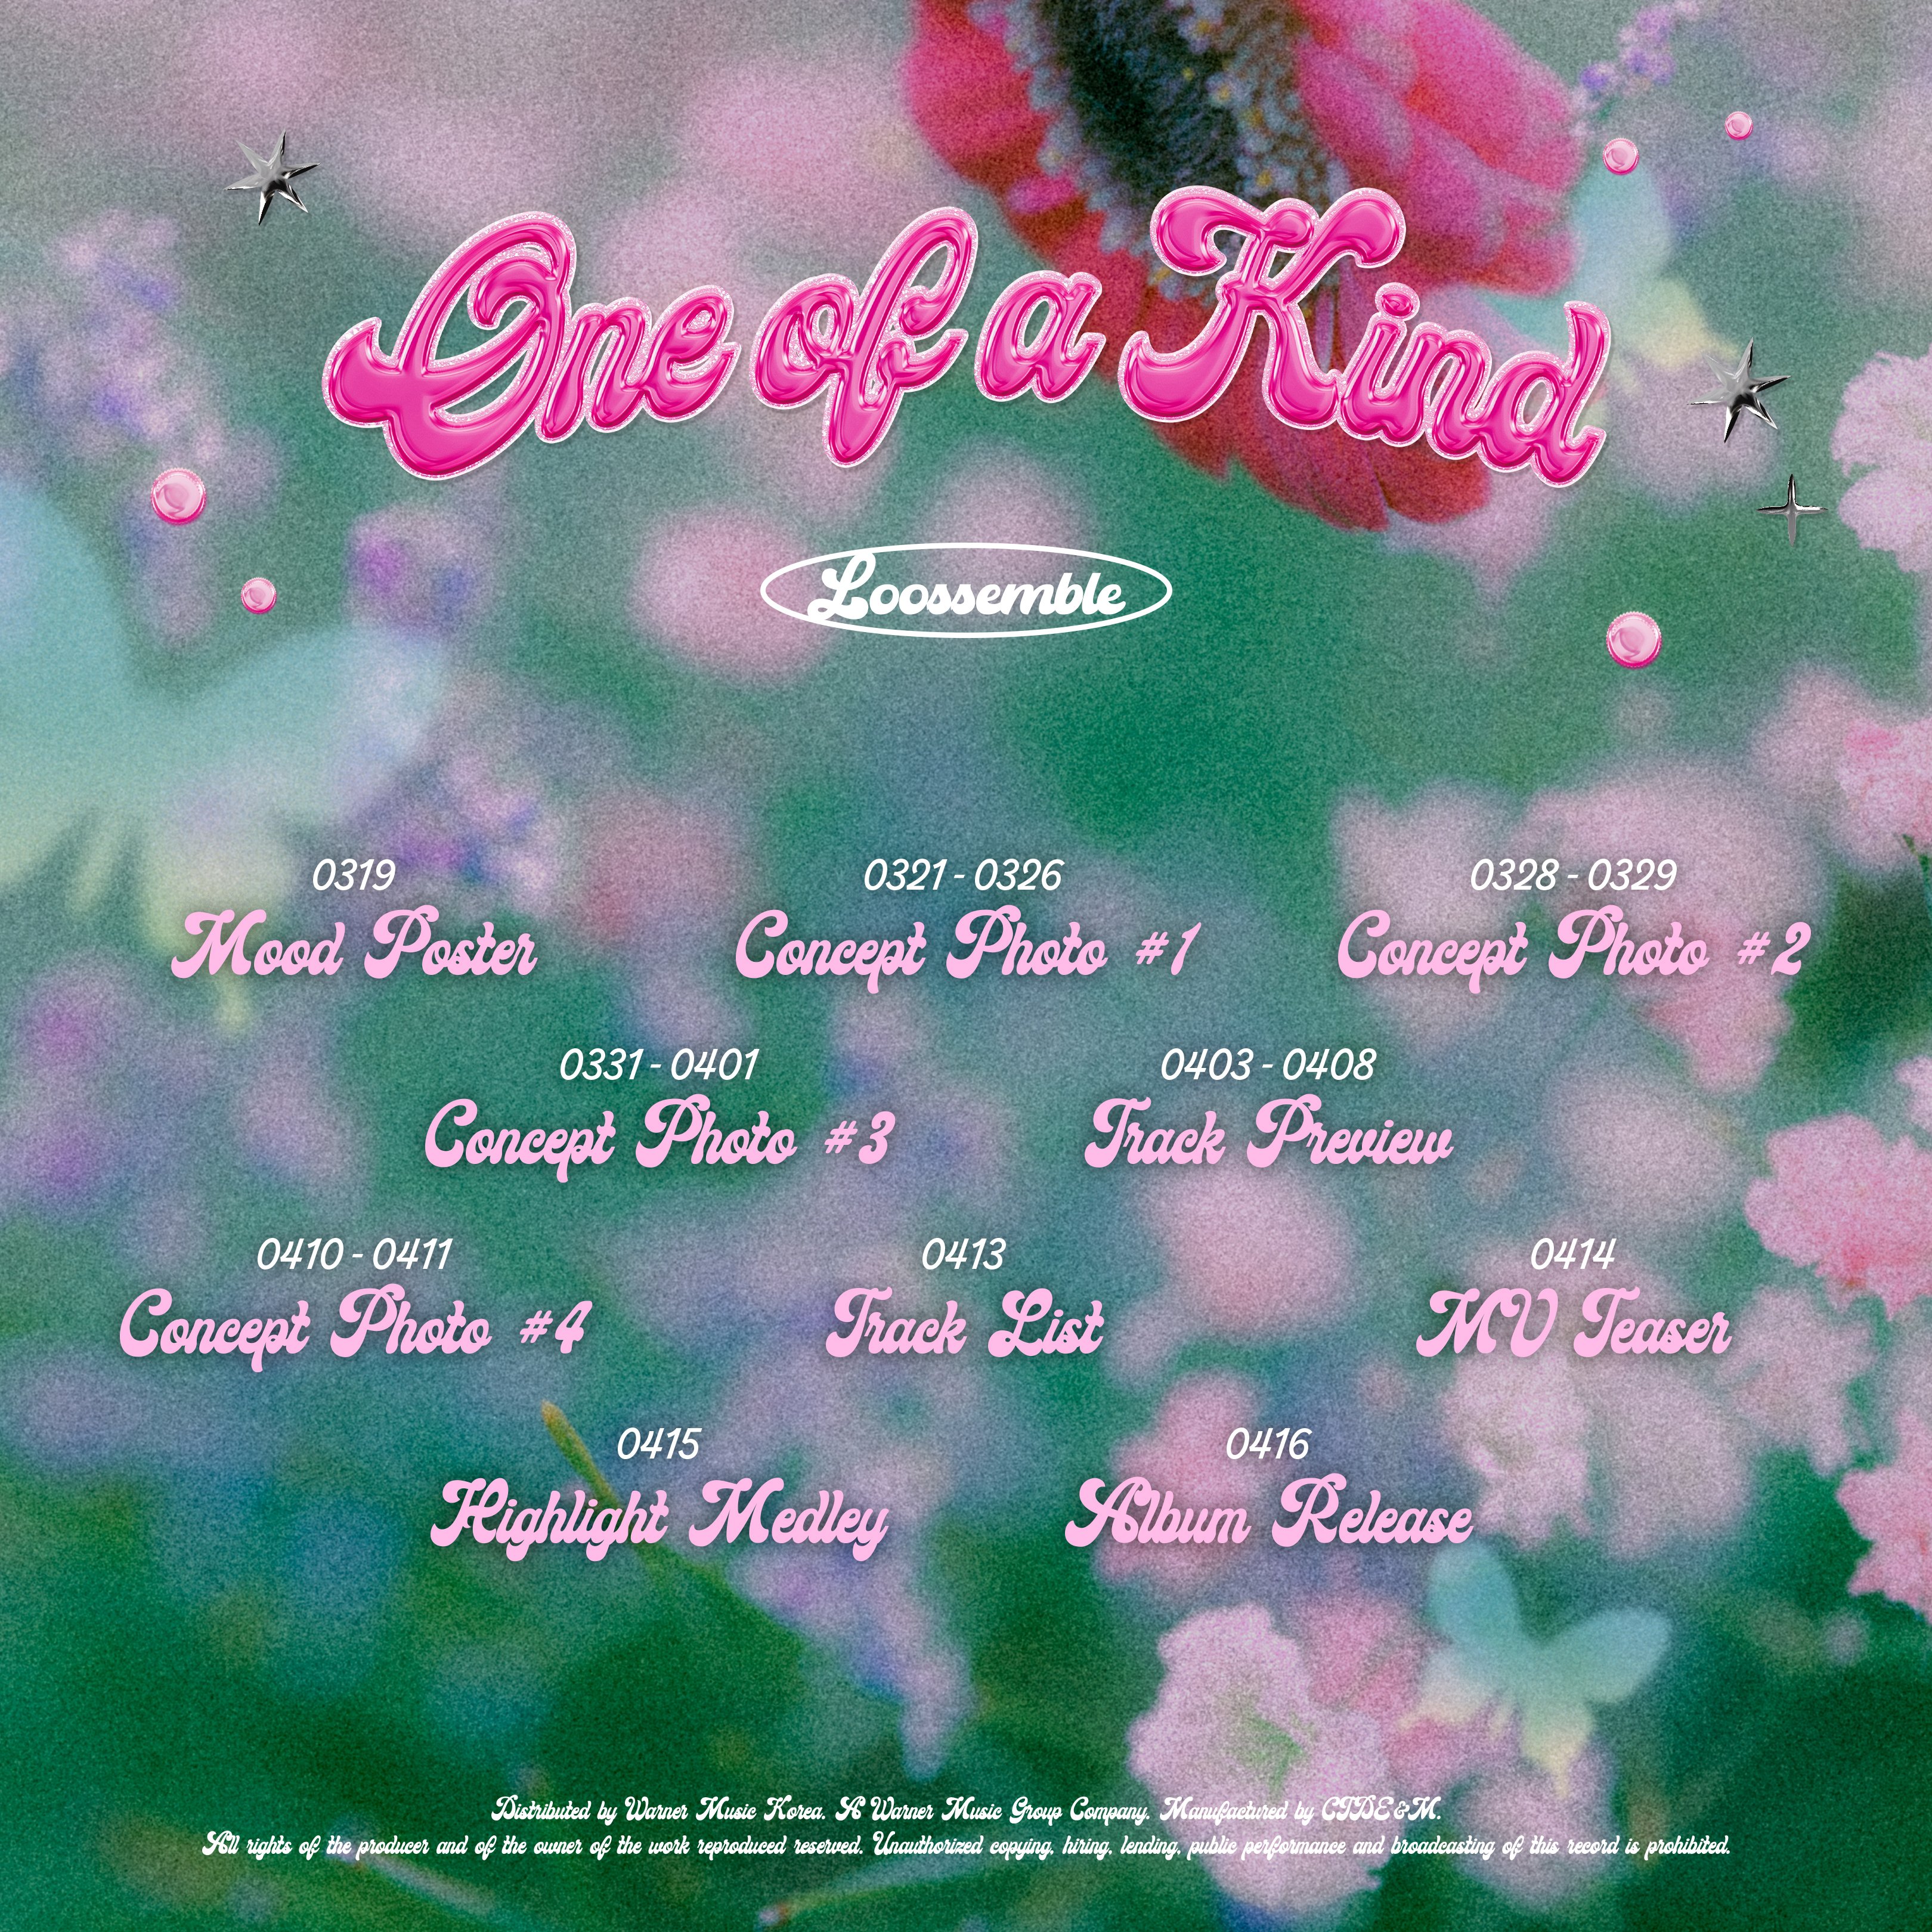 Loossemble Announces April Comeback Date With Schedule For “One Of A Kind”